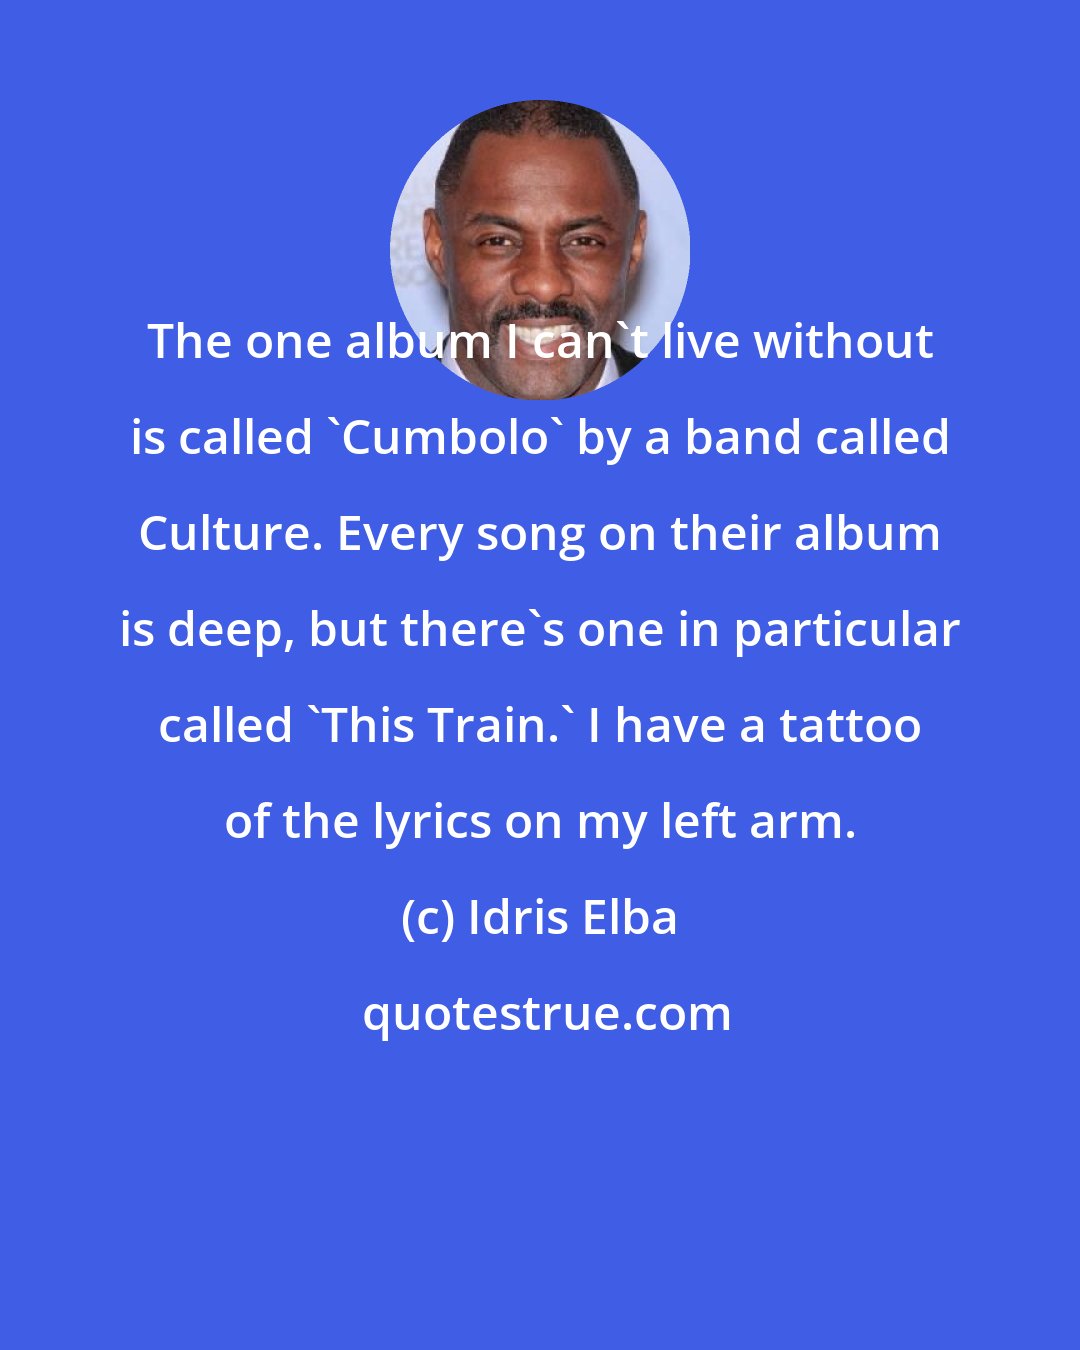 Idris Elba: The one album I can't live without is called 'Cumbolo' by a band called Culture. Every song on their album is deep, but there's one in particular called 'This Train.' I have a tattoo of the lyrics on my left arm.